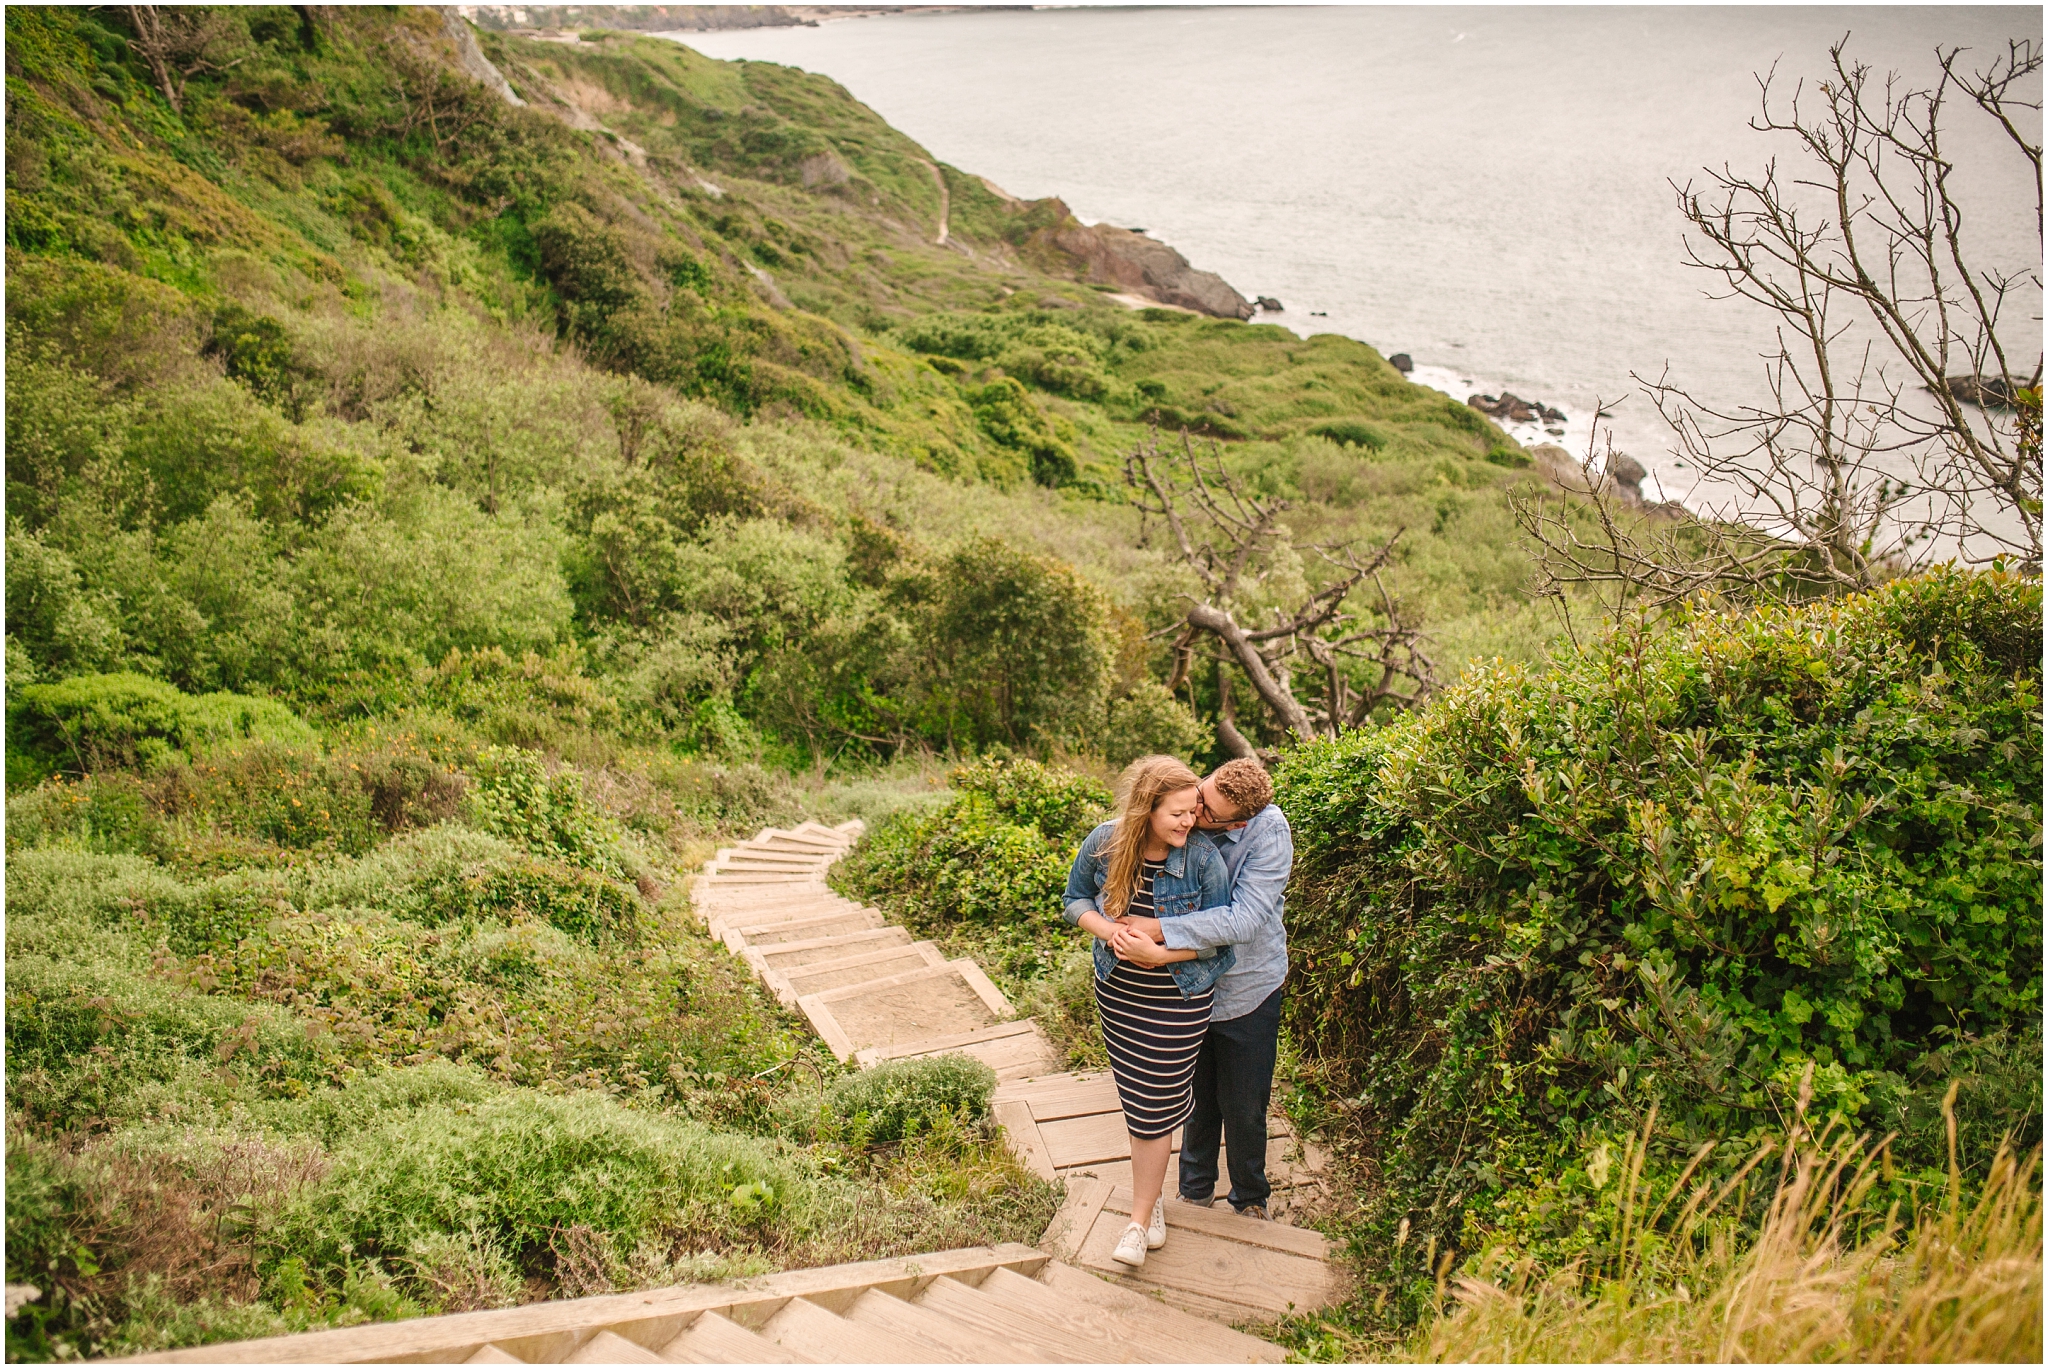 Couple wandering the Batteries to Bluffs trail in Presidio San Francisco